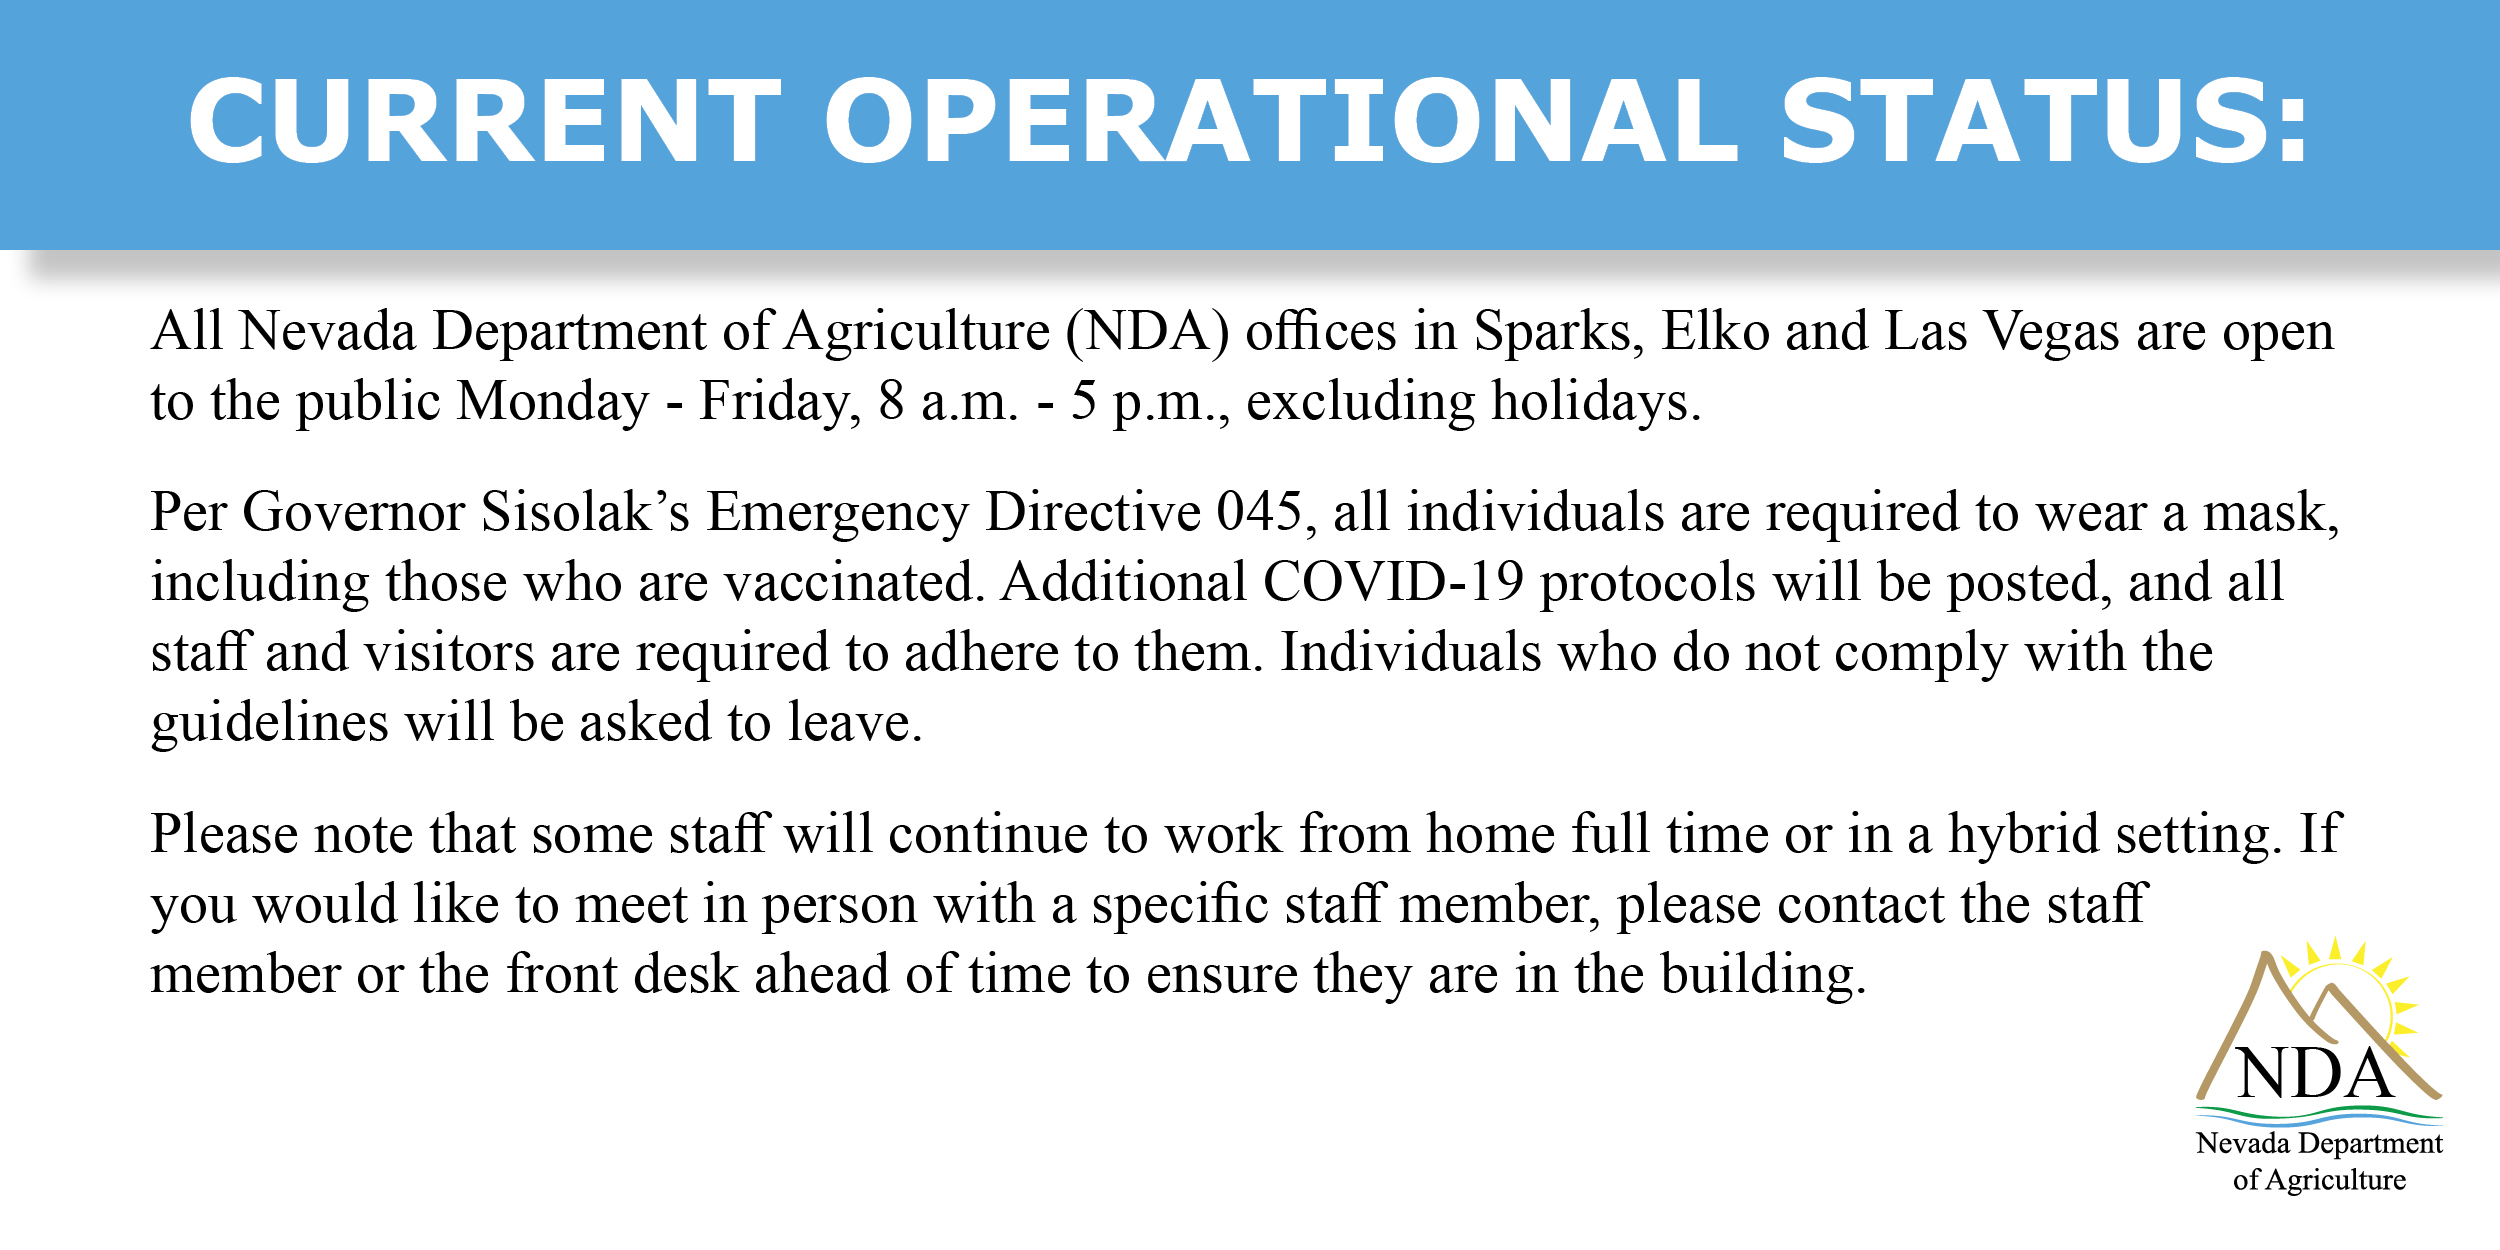 Current Operational Status: All Nevada Department of Agriculture (NDA) offices in Sparks, Elko and Las Vegas are now open to the public Monday - Friday, 8 a.m. - 5 p.m., excluding holidays. Per Governor Sisolak’s Emergency Directive 045, all individuals are required to wear a mask, including those who are vaccinated. Additional COVID-19 protocols will be posted, and all staff and visitors are required to adhere to them. Individuals who do not comply with the guidelines will be asked to leave. Please note that some staff will continue to work from home full time or in a hybrid setting. If you would like to meet in person with a specific staff member, please contact the staff member or the front desk ahead of time to ensure they are in the building.